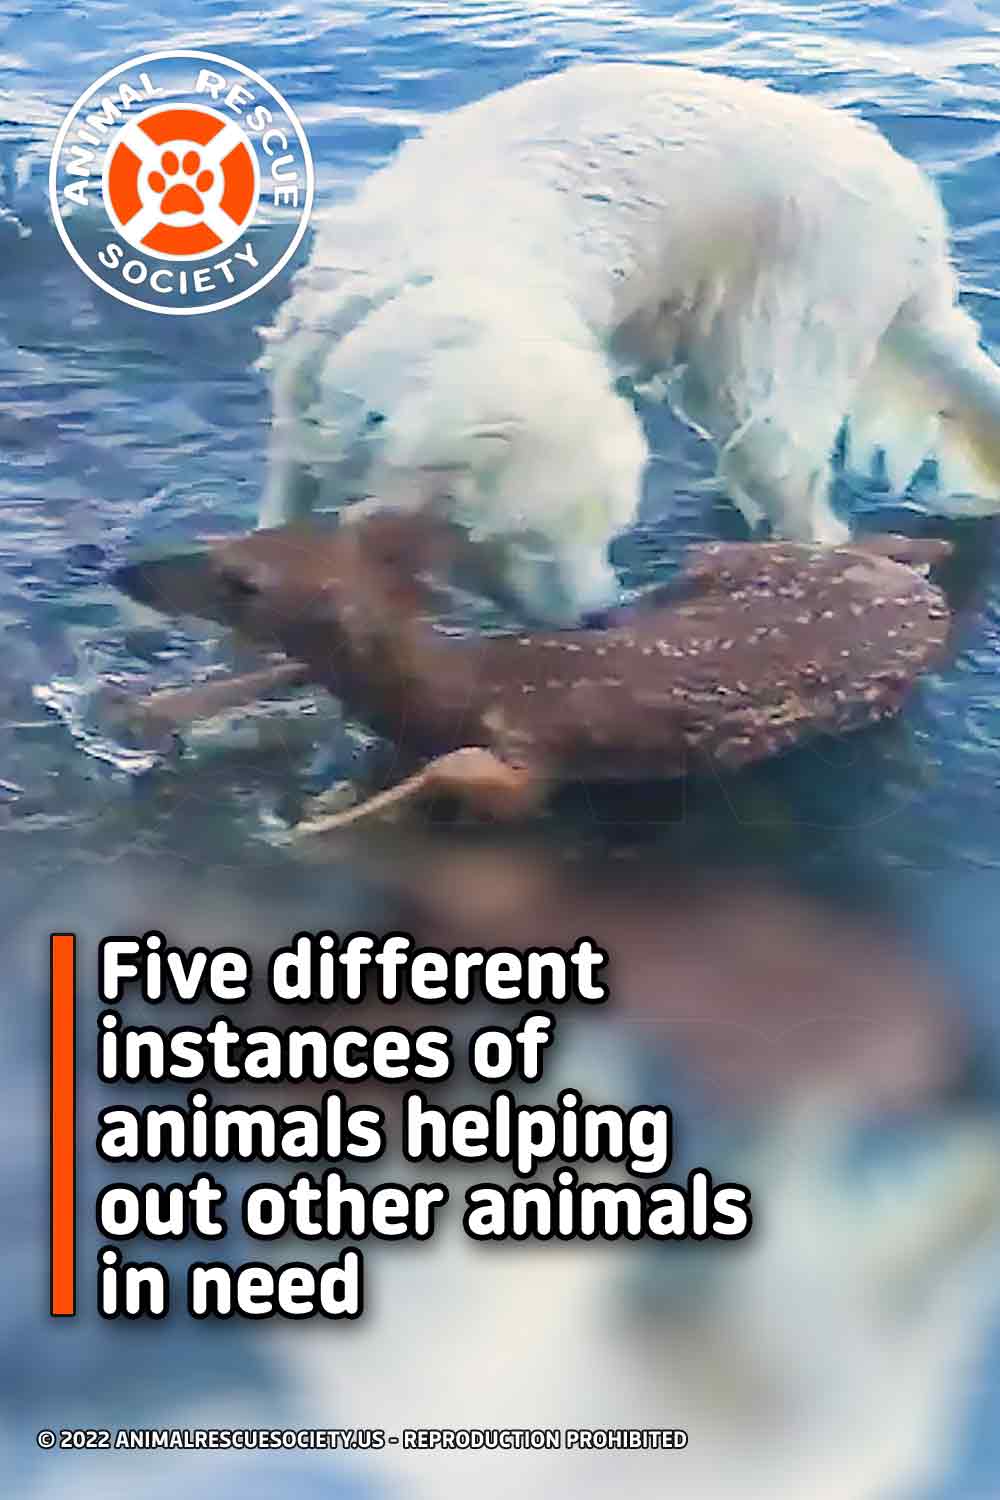 Five different instances of animals helping out other animals in need